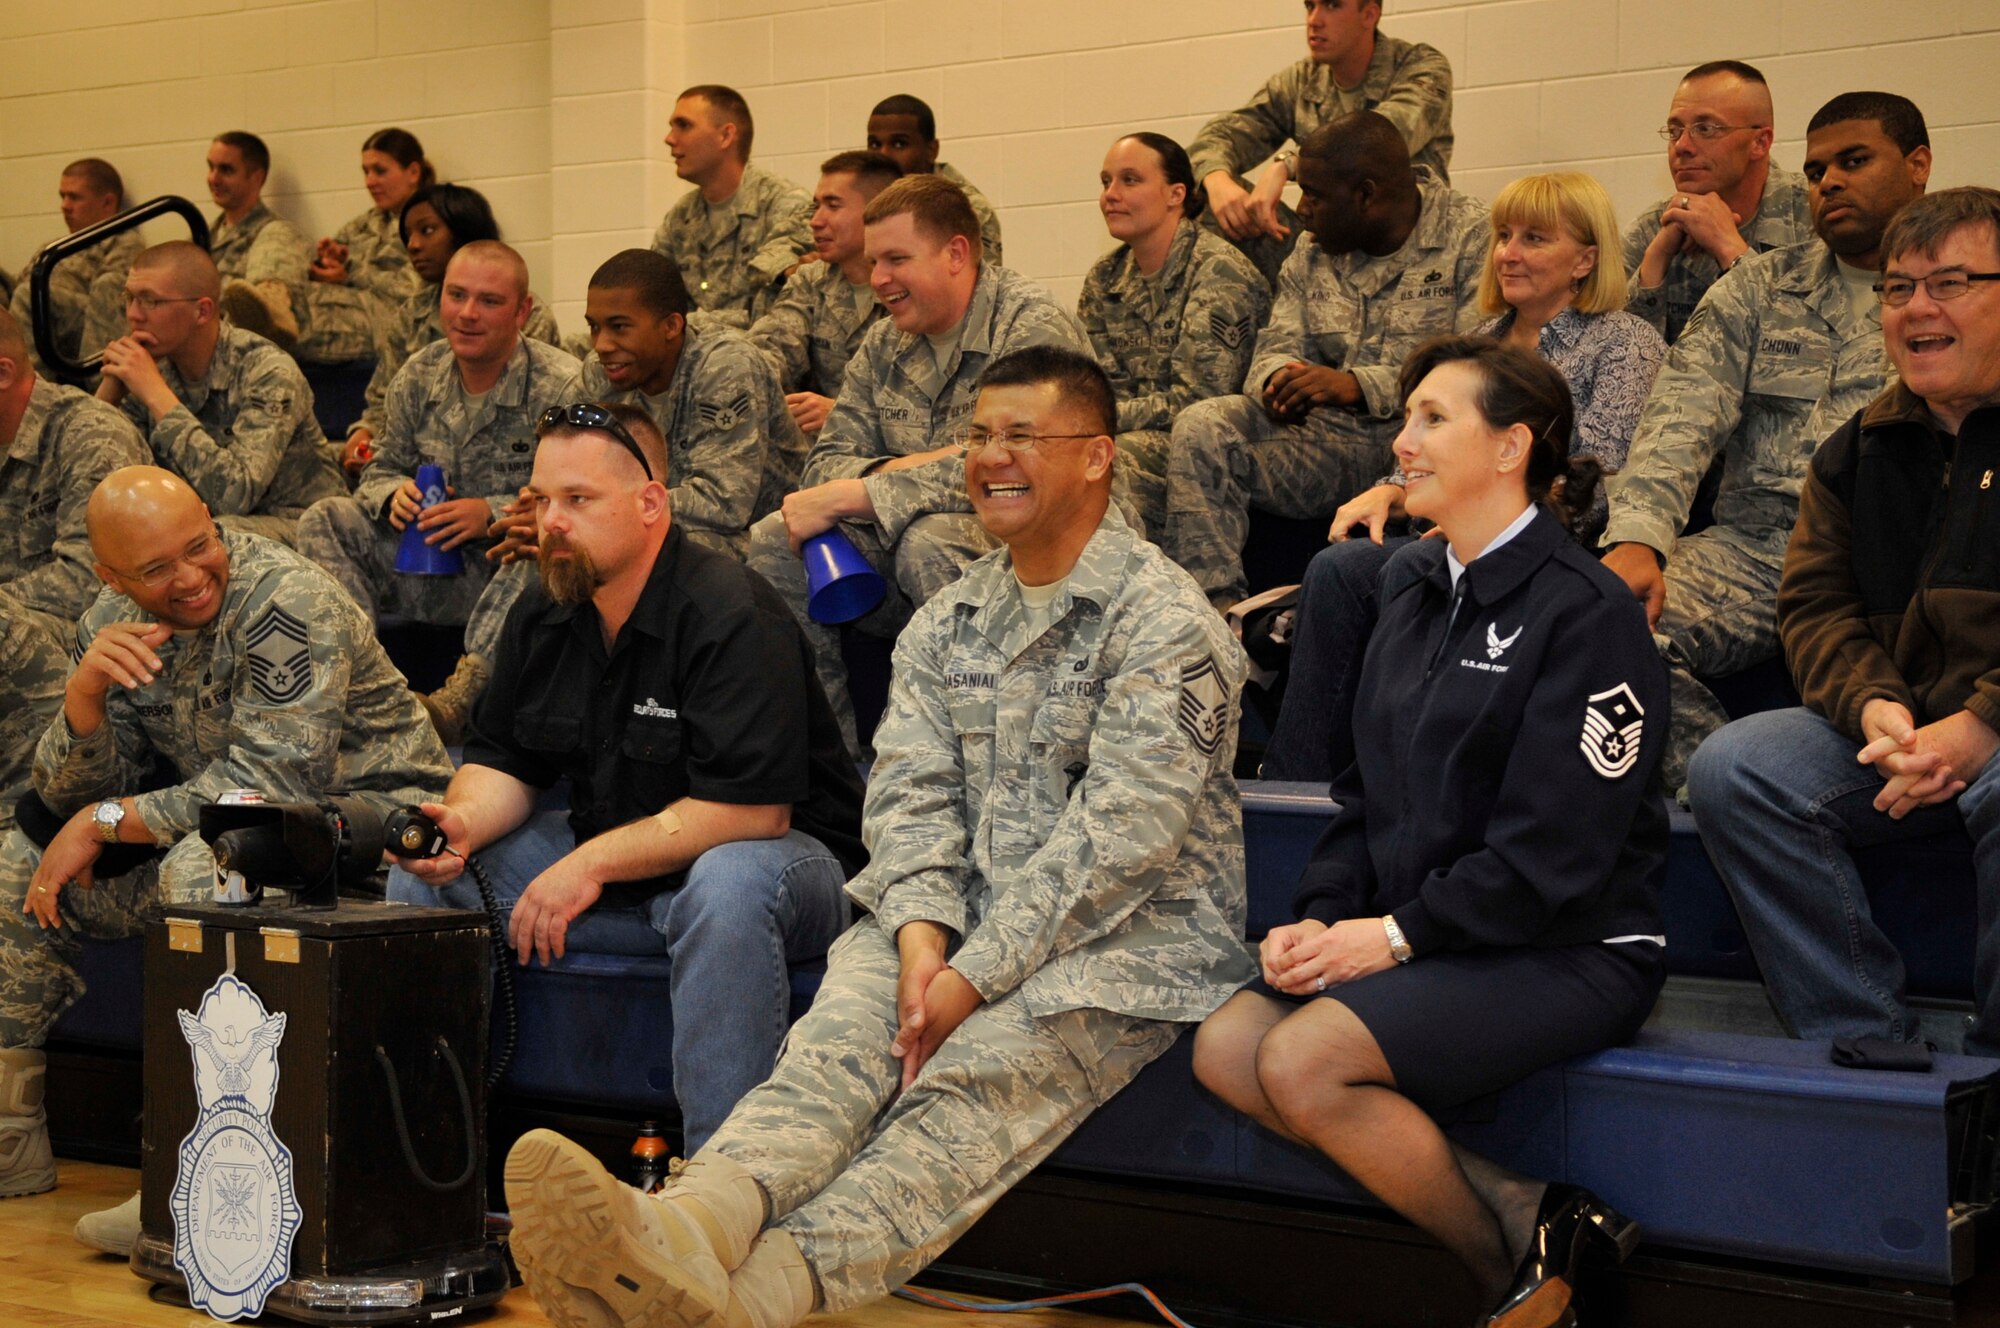 BUCKLEY AIR FORCE BASE, Colo. -- 460th Security Forces Squadron members enjoy the entertainment at the Buckley Guardian Challenge Pep Rally May 14. (U.S. Air Force photo by Airman 1st Class Paul Labbe)

